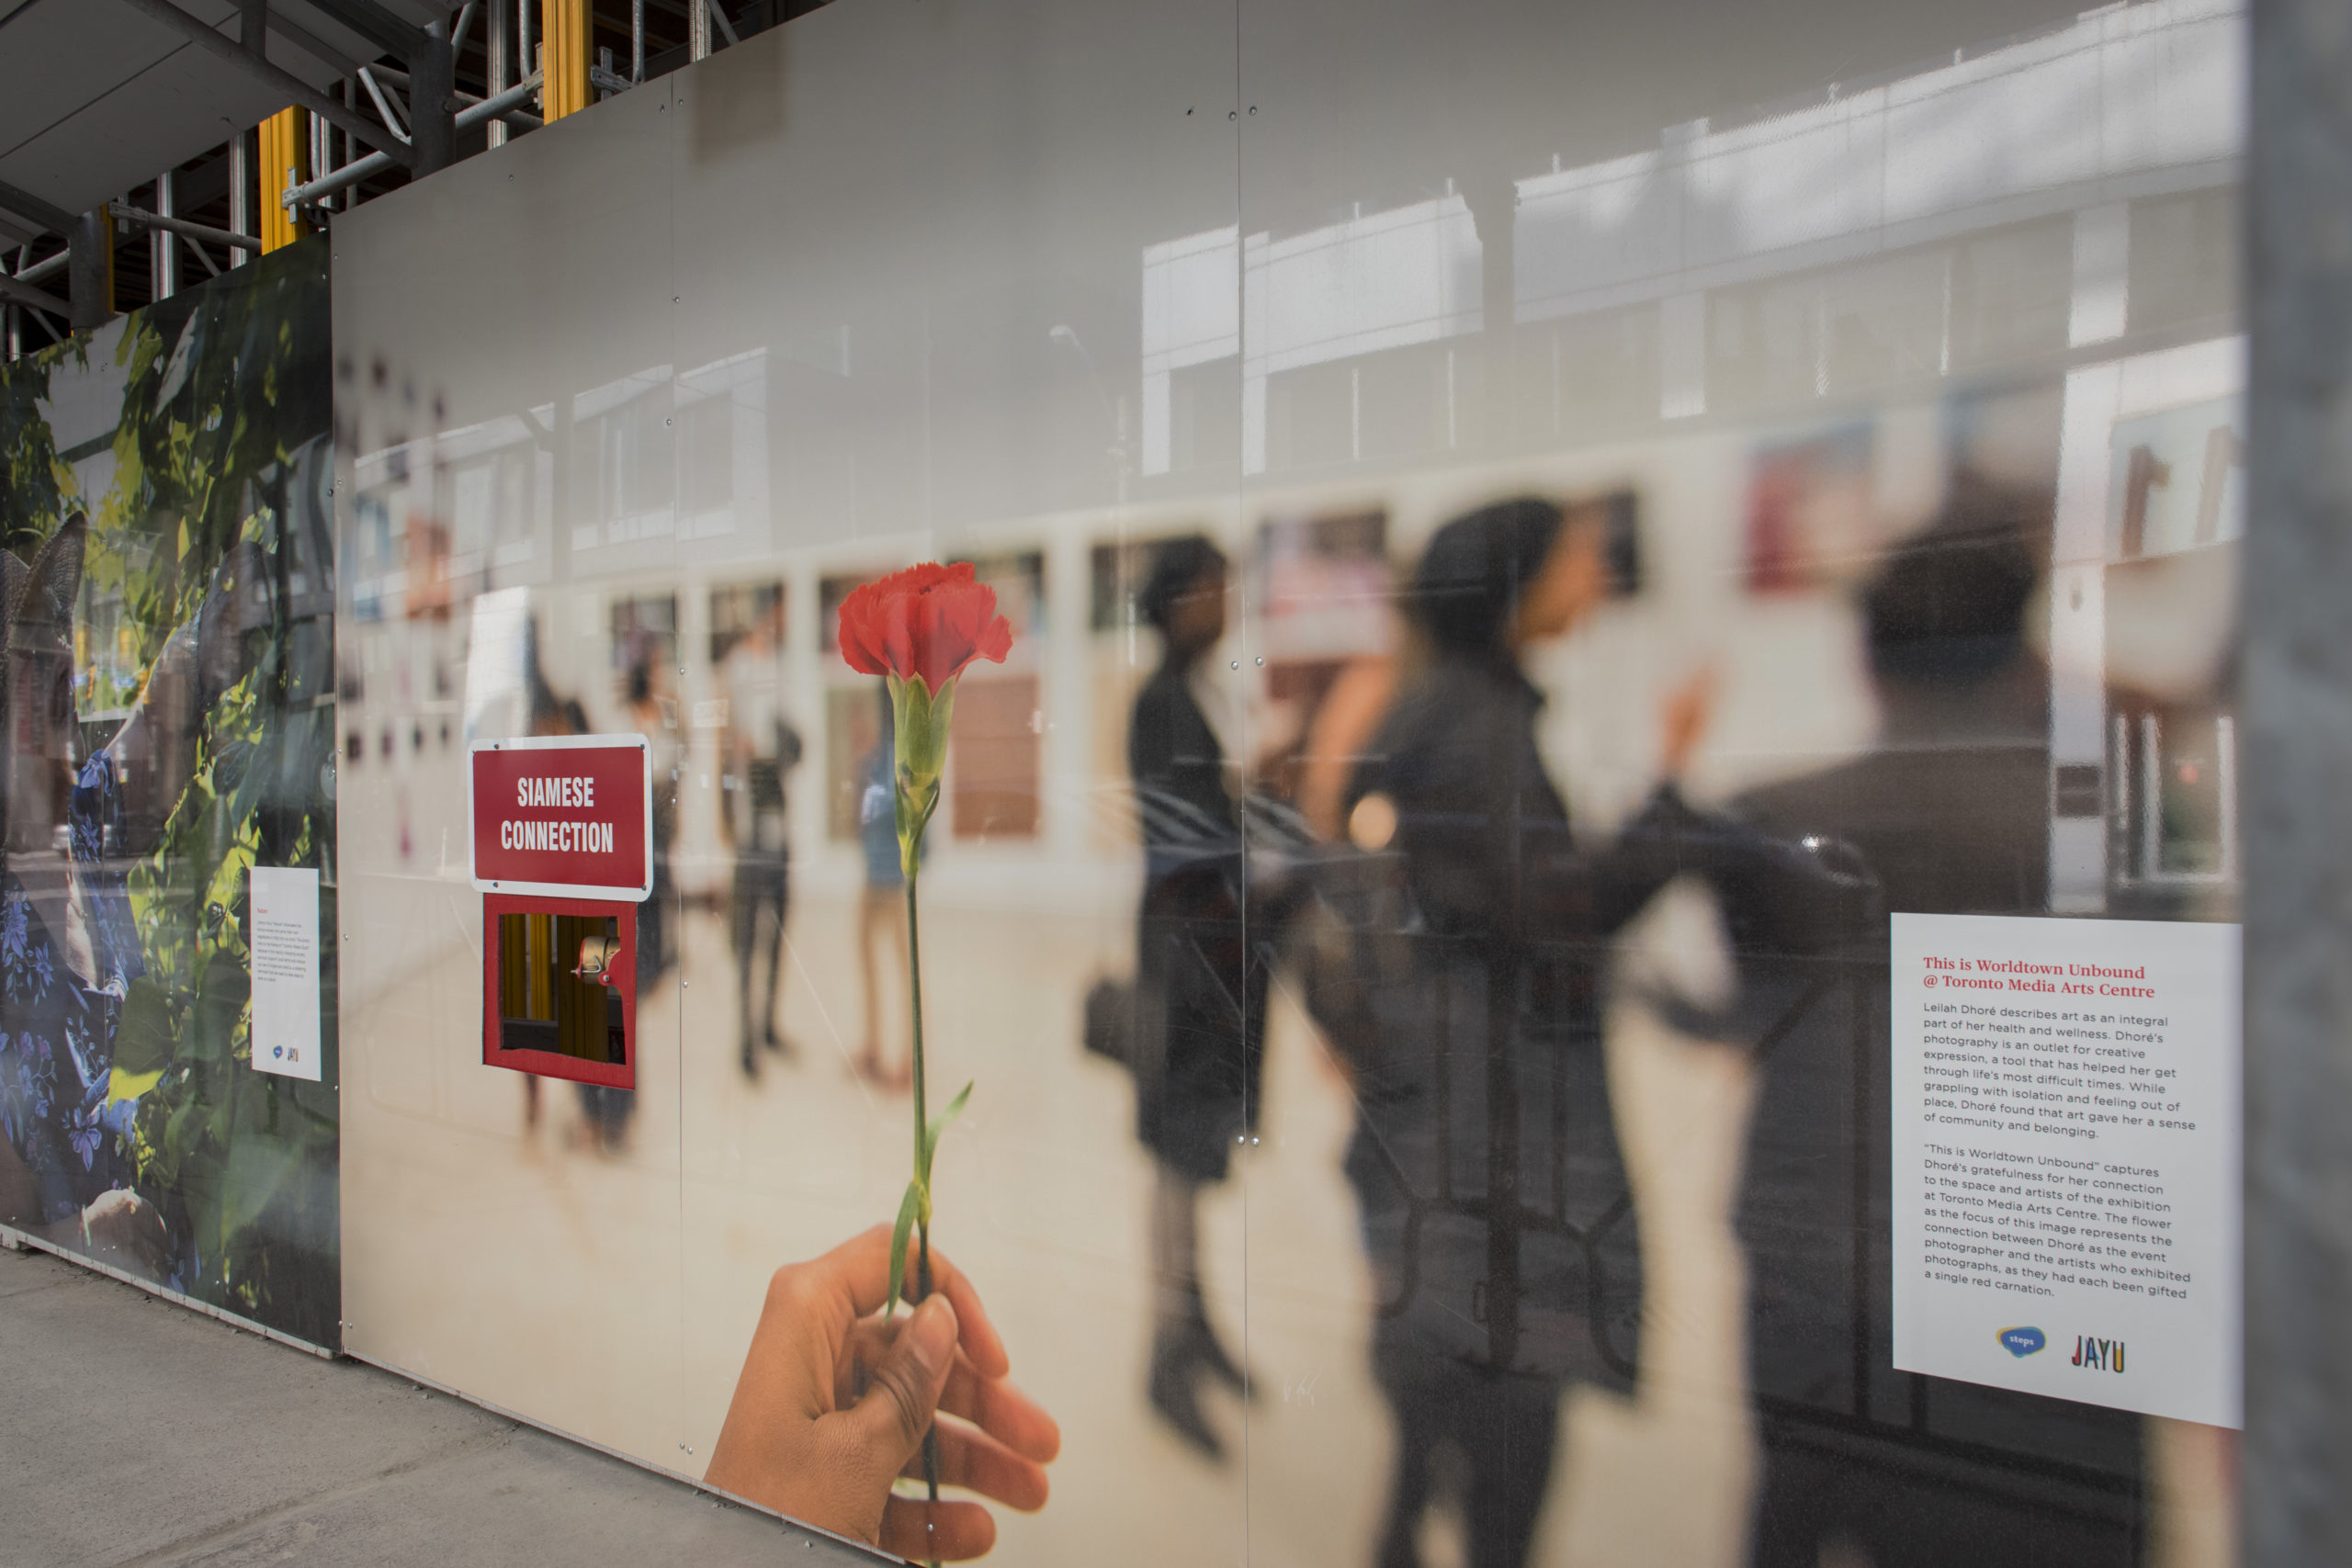 Toronto Makes Good Hoarding Exhibit featuring artwork by Leilah Dhore of a person holding a rose in an art gallery with people in the background.